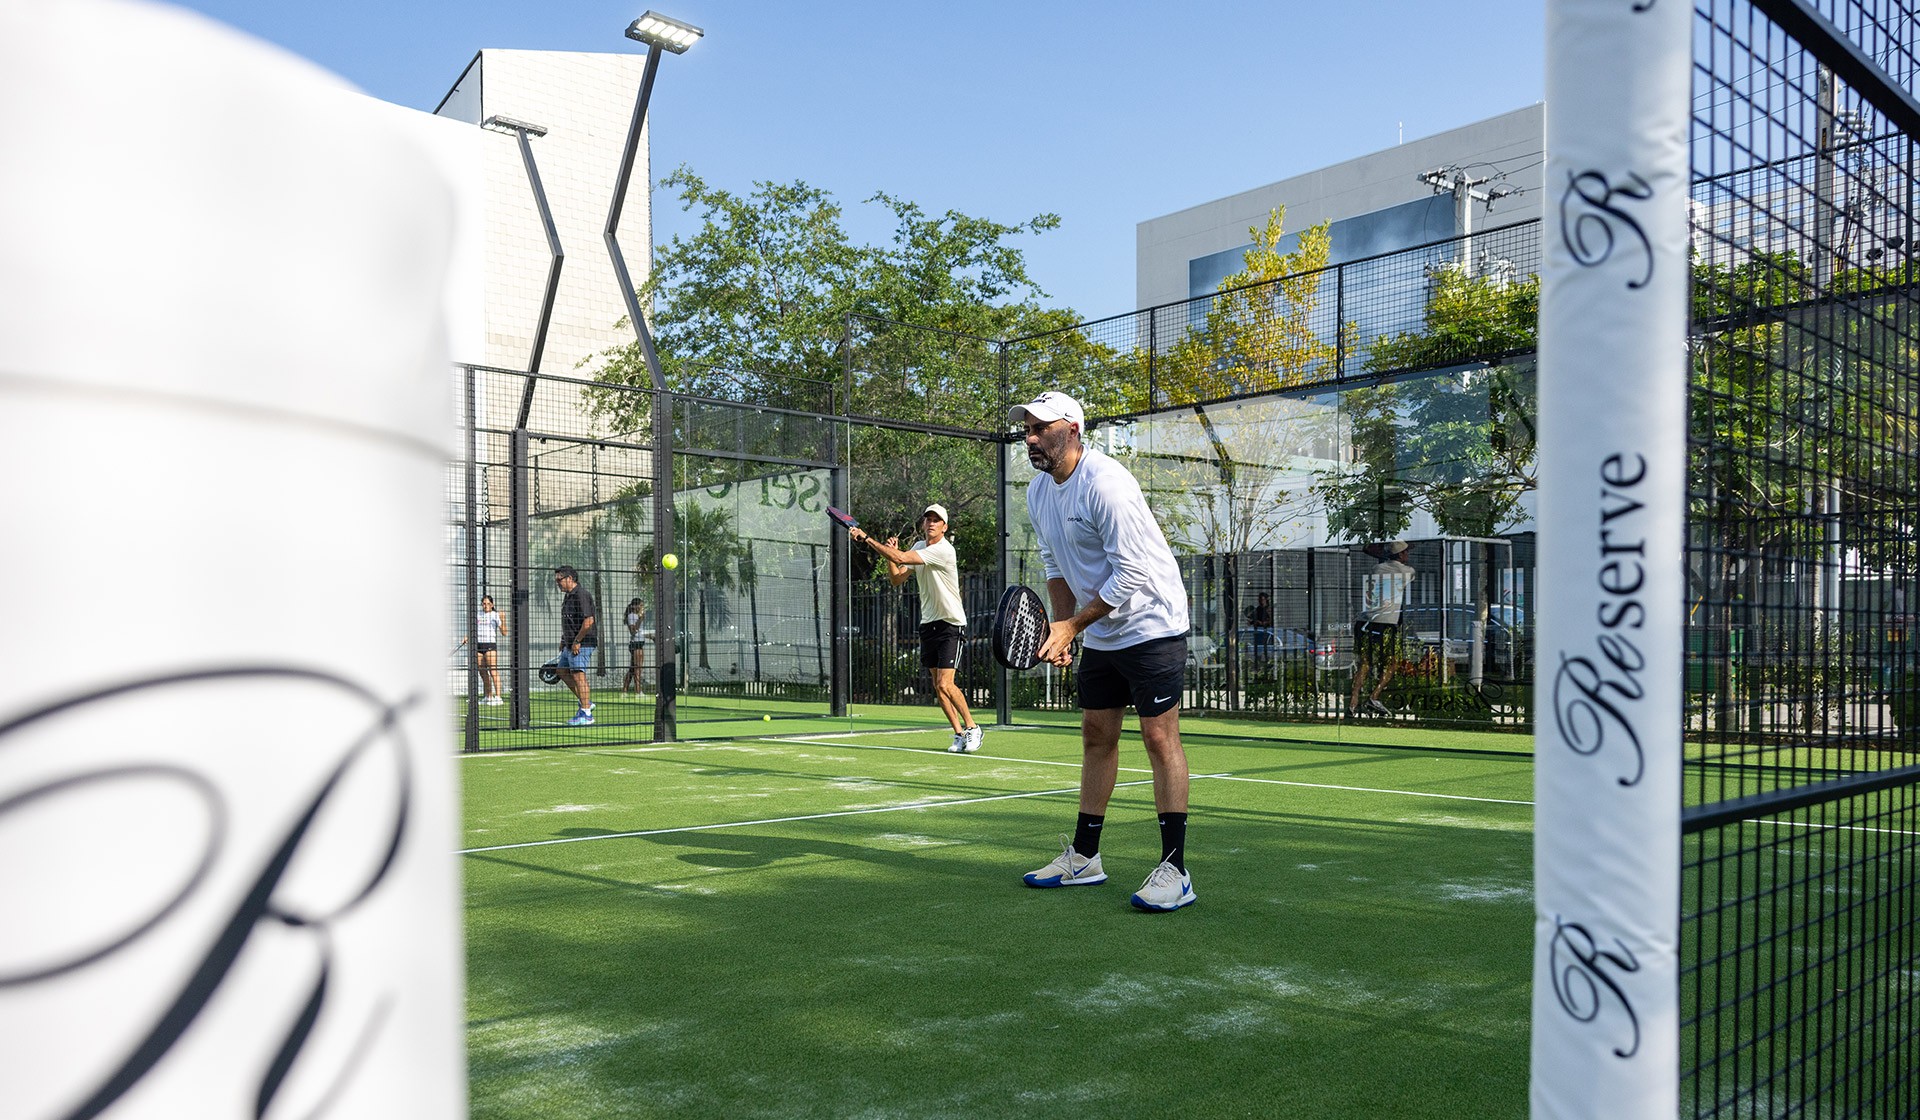 Leading Padel brand Reserve brings its first members-only club to Miami Design District